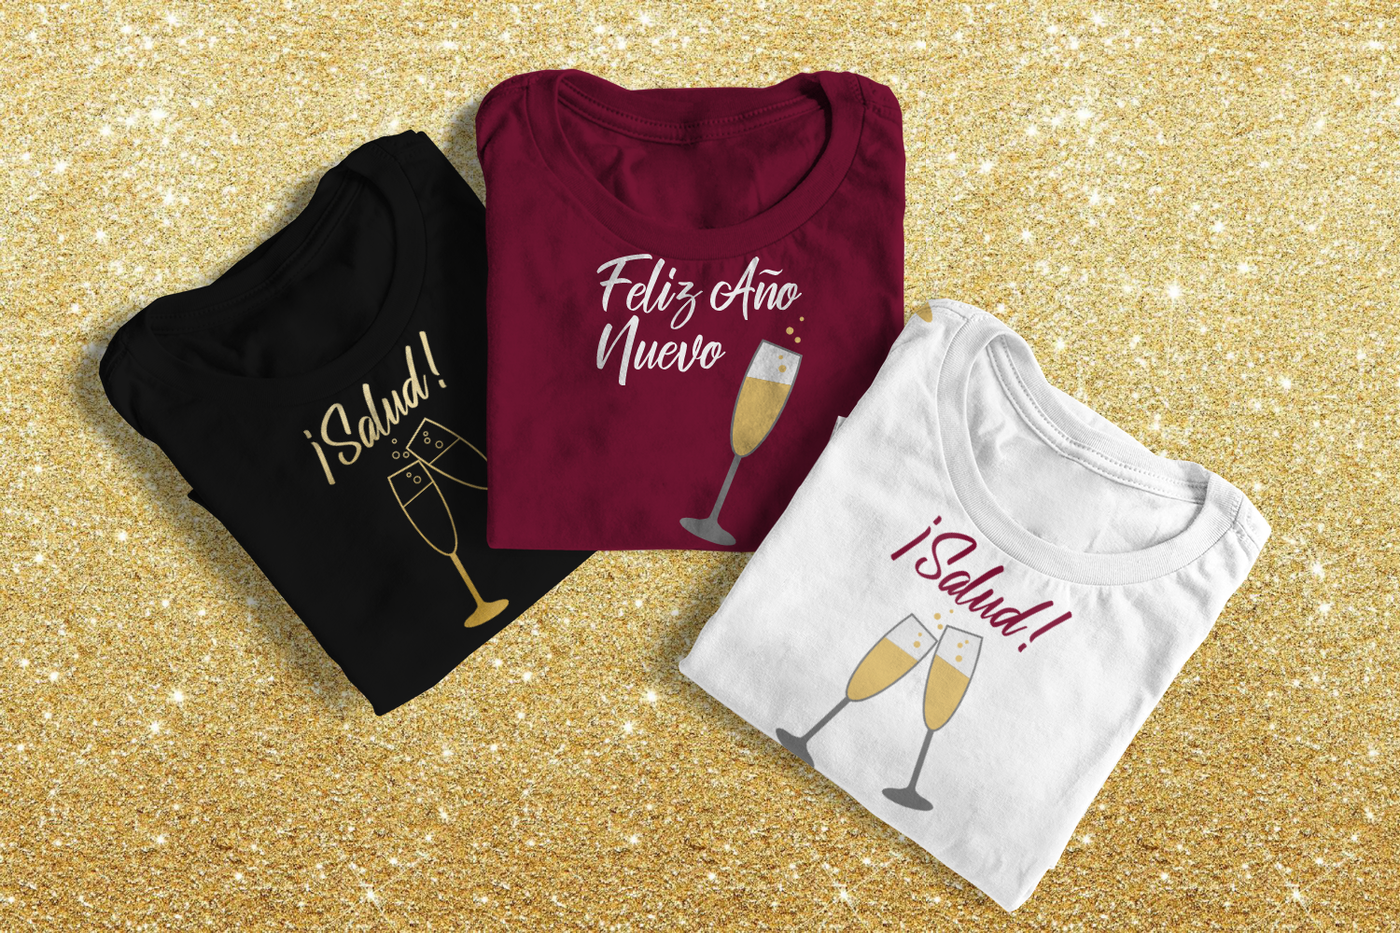 Three folded tees. Two say "Salud!" with toasting champagne glasses. One says "Feliz Año Nuevo" with a single glass of champagne.